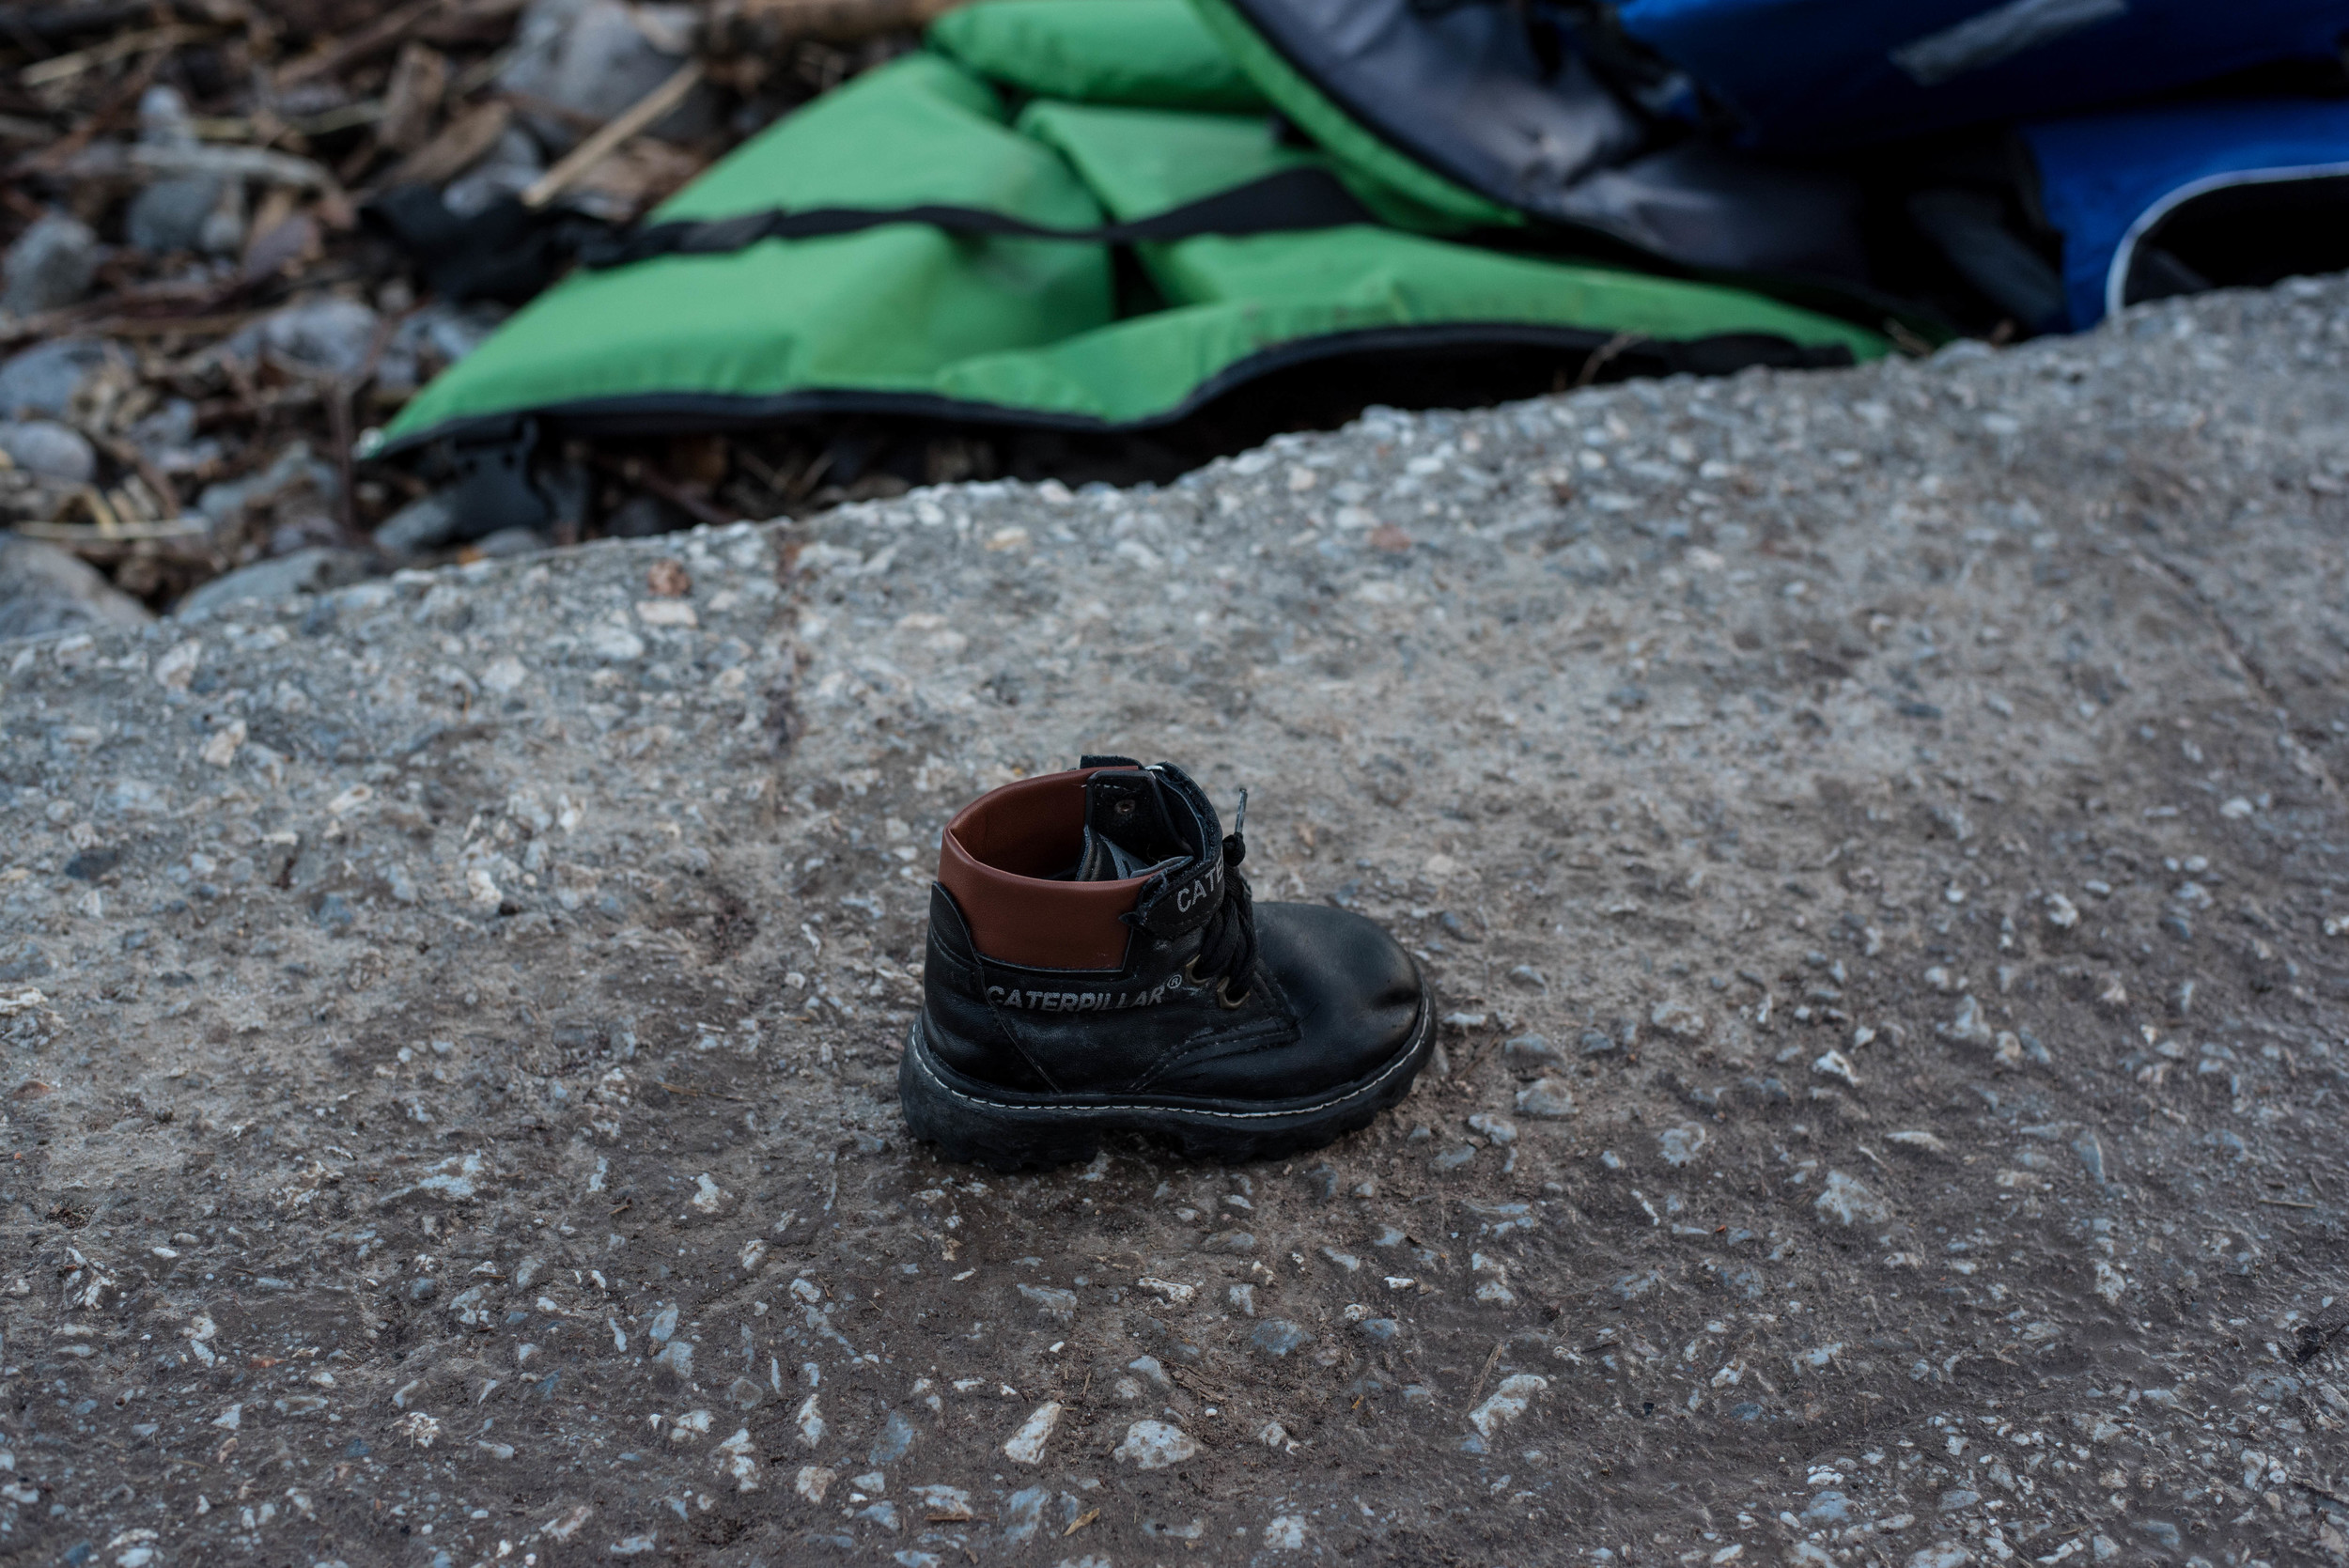  A child's boot left behind. Water-logged shoes are usually the first possessions cast aside. 